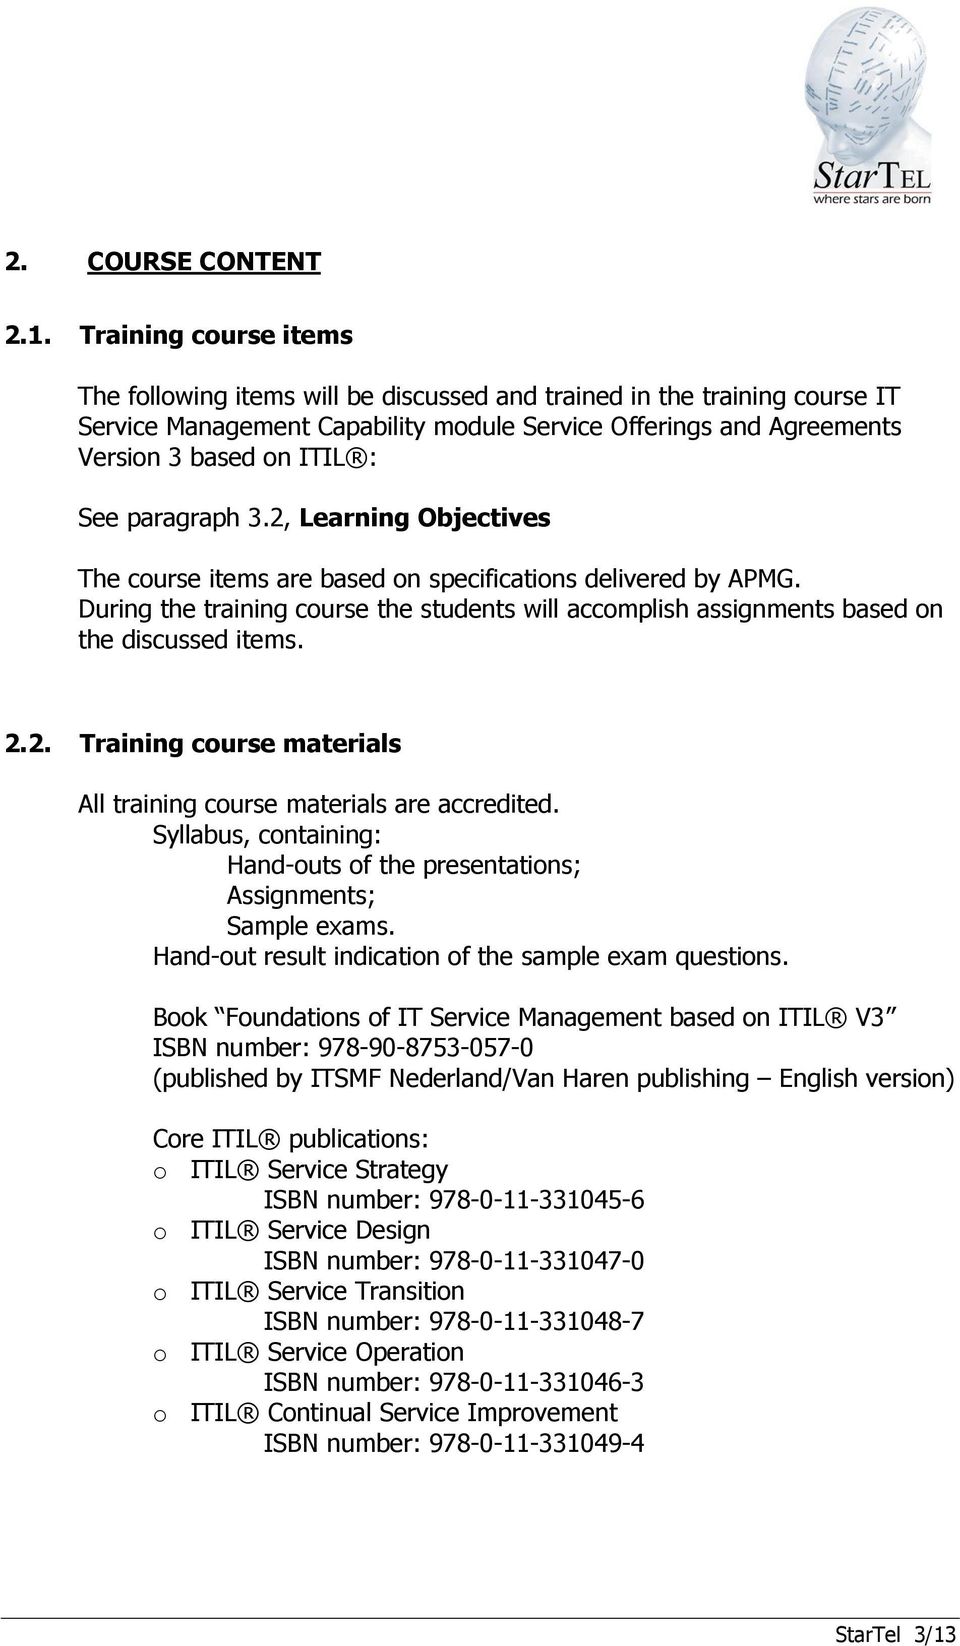 paragraph 3.2, Learning Objectives The course items are based on specifications delivered by APMG. During the training course the students will accomplish assignments based on the discussed items. 2.